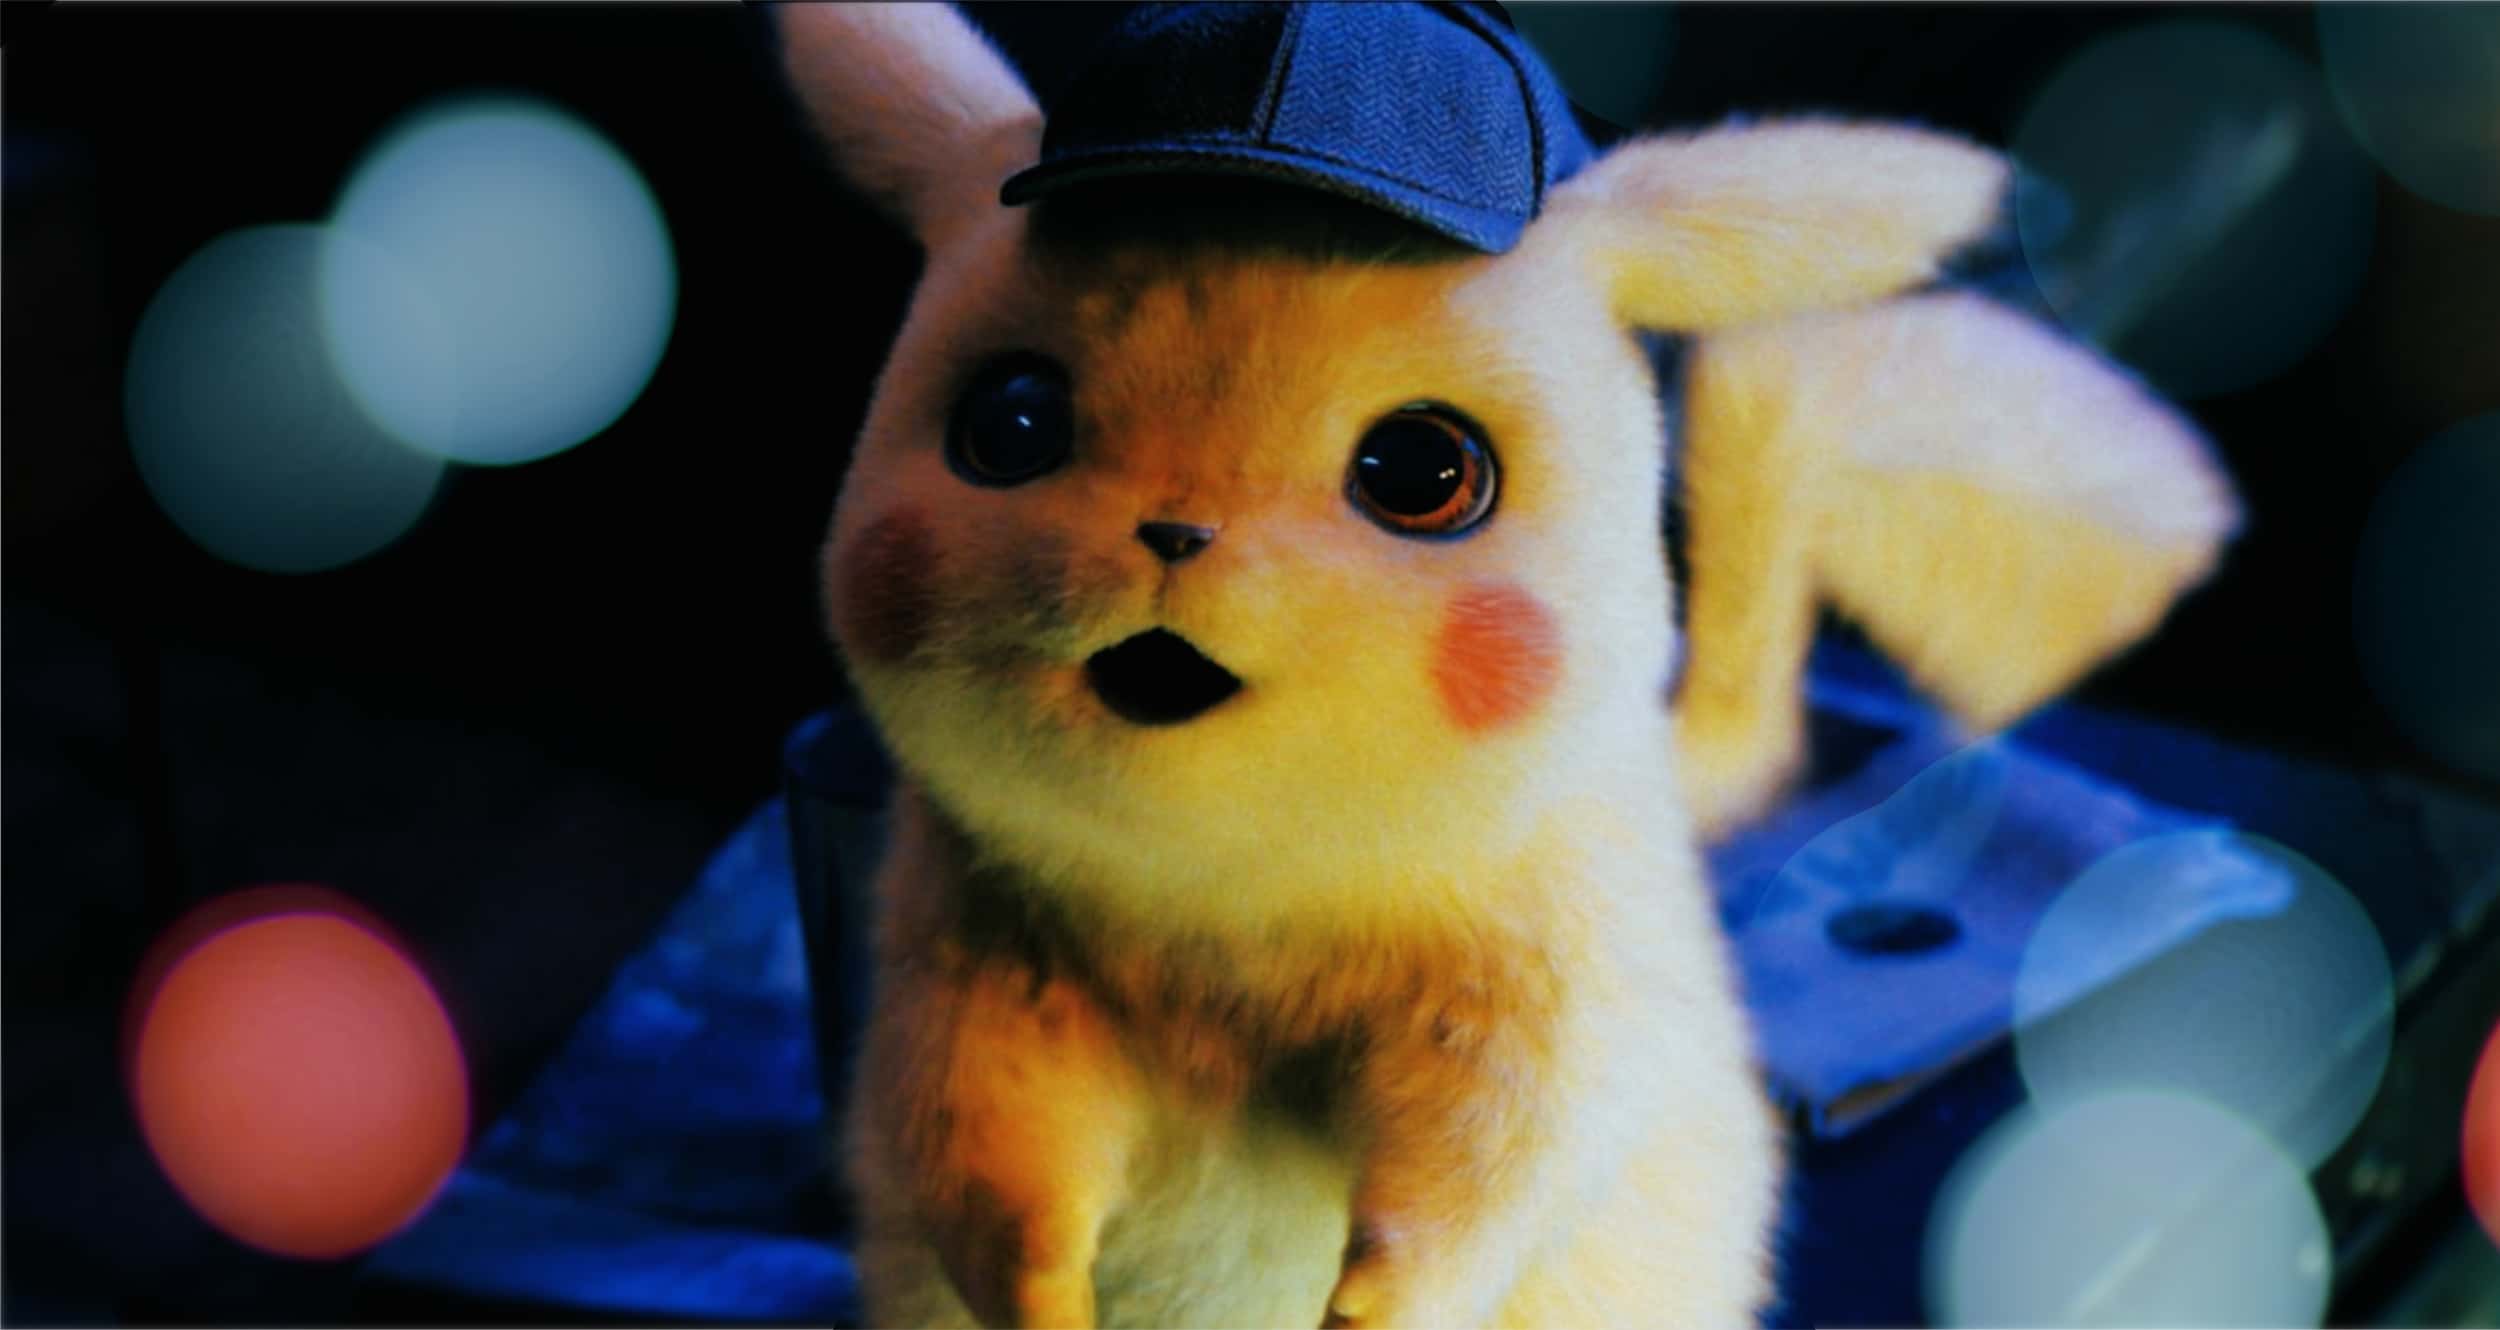 Watch Detective Pikachu online for free, thanks to Ryan ...